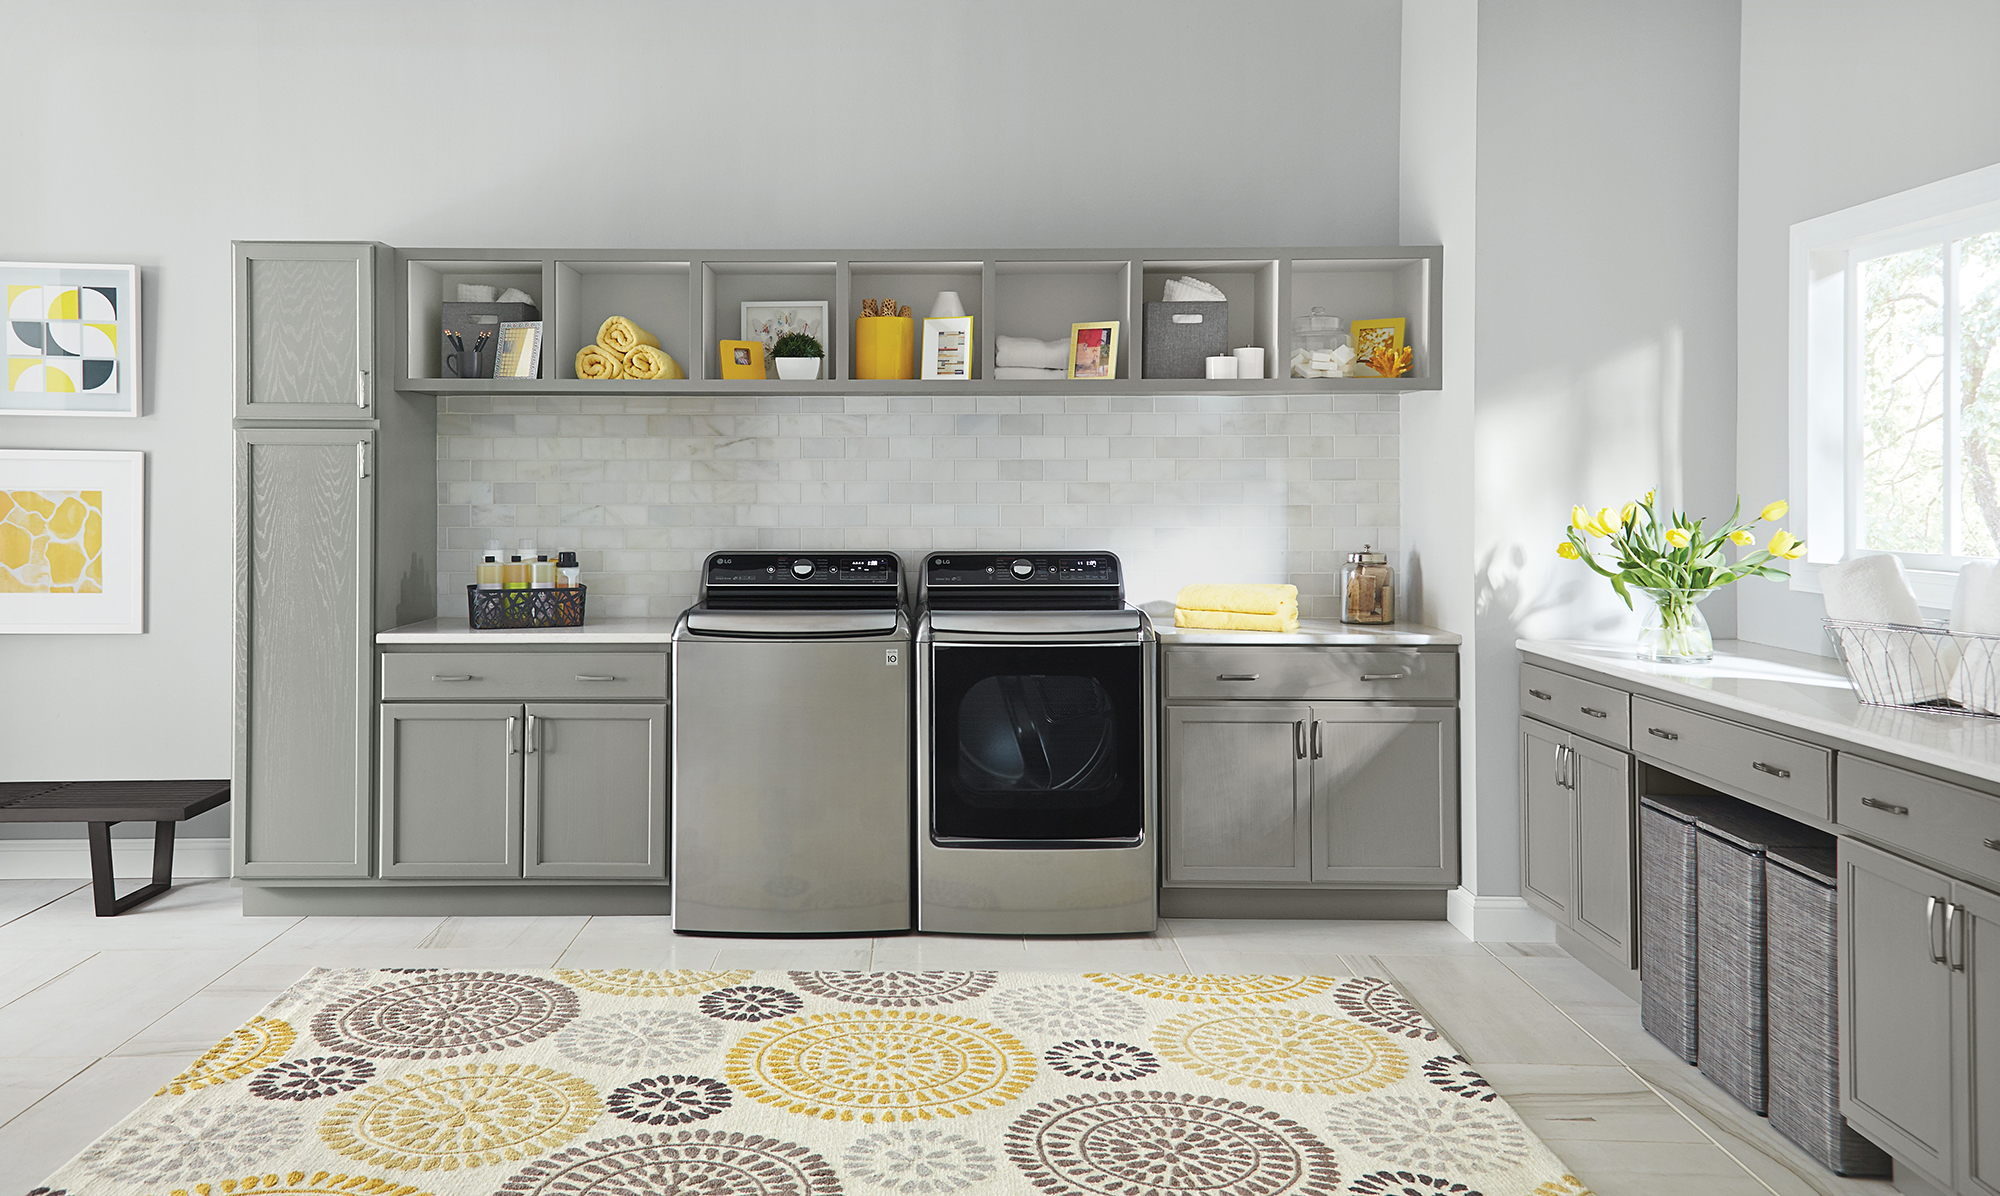 LG washer and dryer in gray and yellow themed laundry room